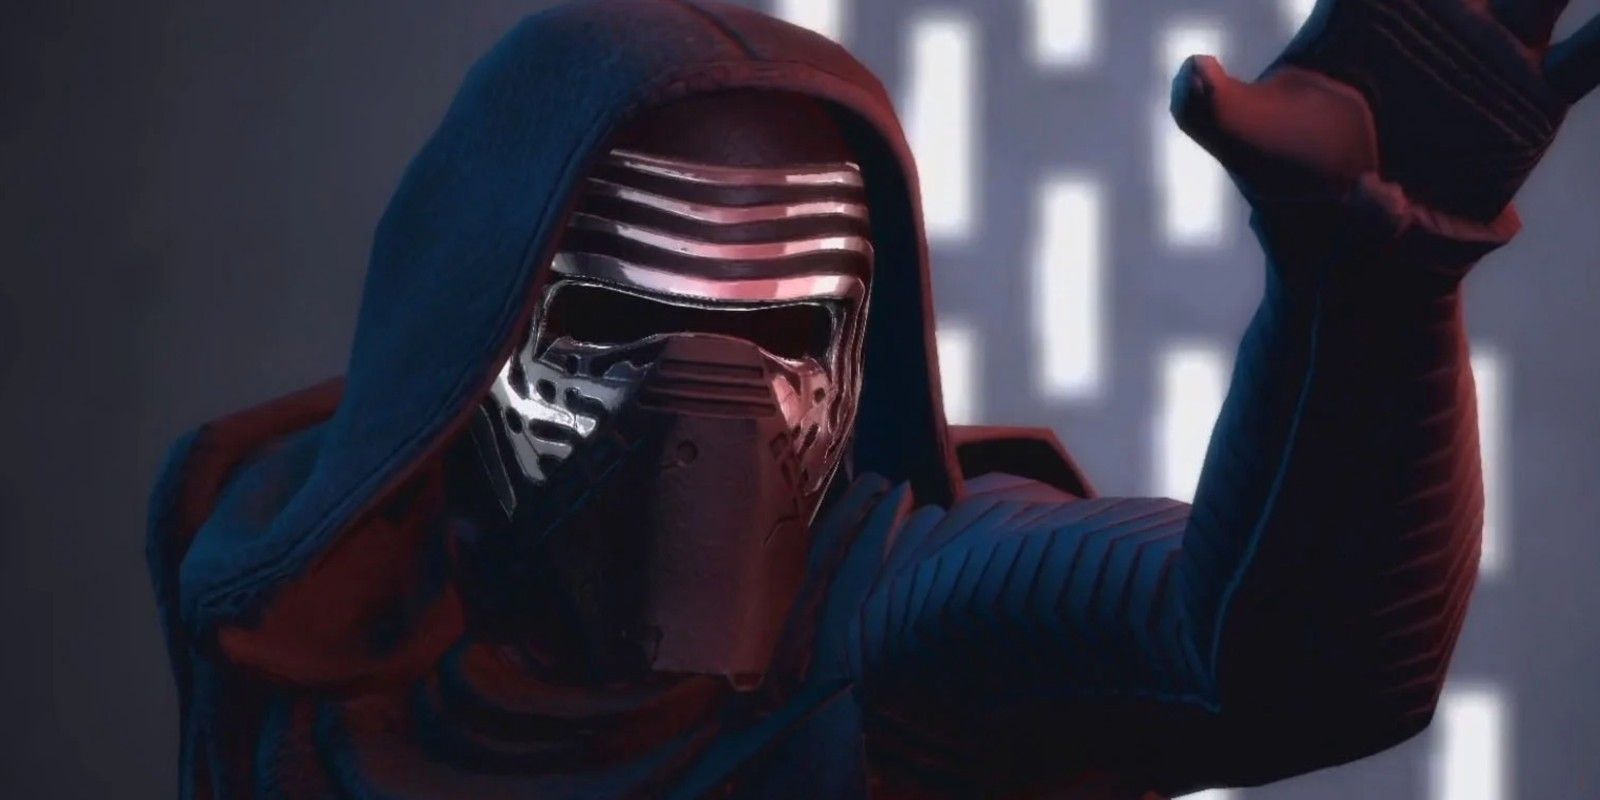 Kylo Ren in the trailer for Sims 4 Star Wars: Journey to Batuu